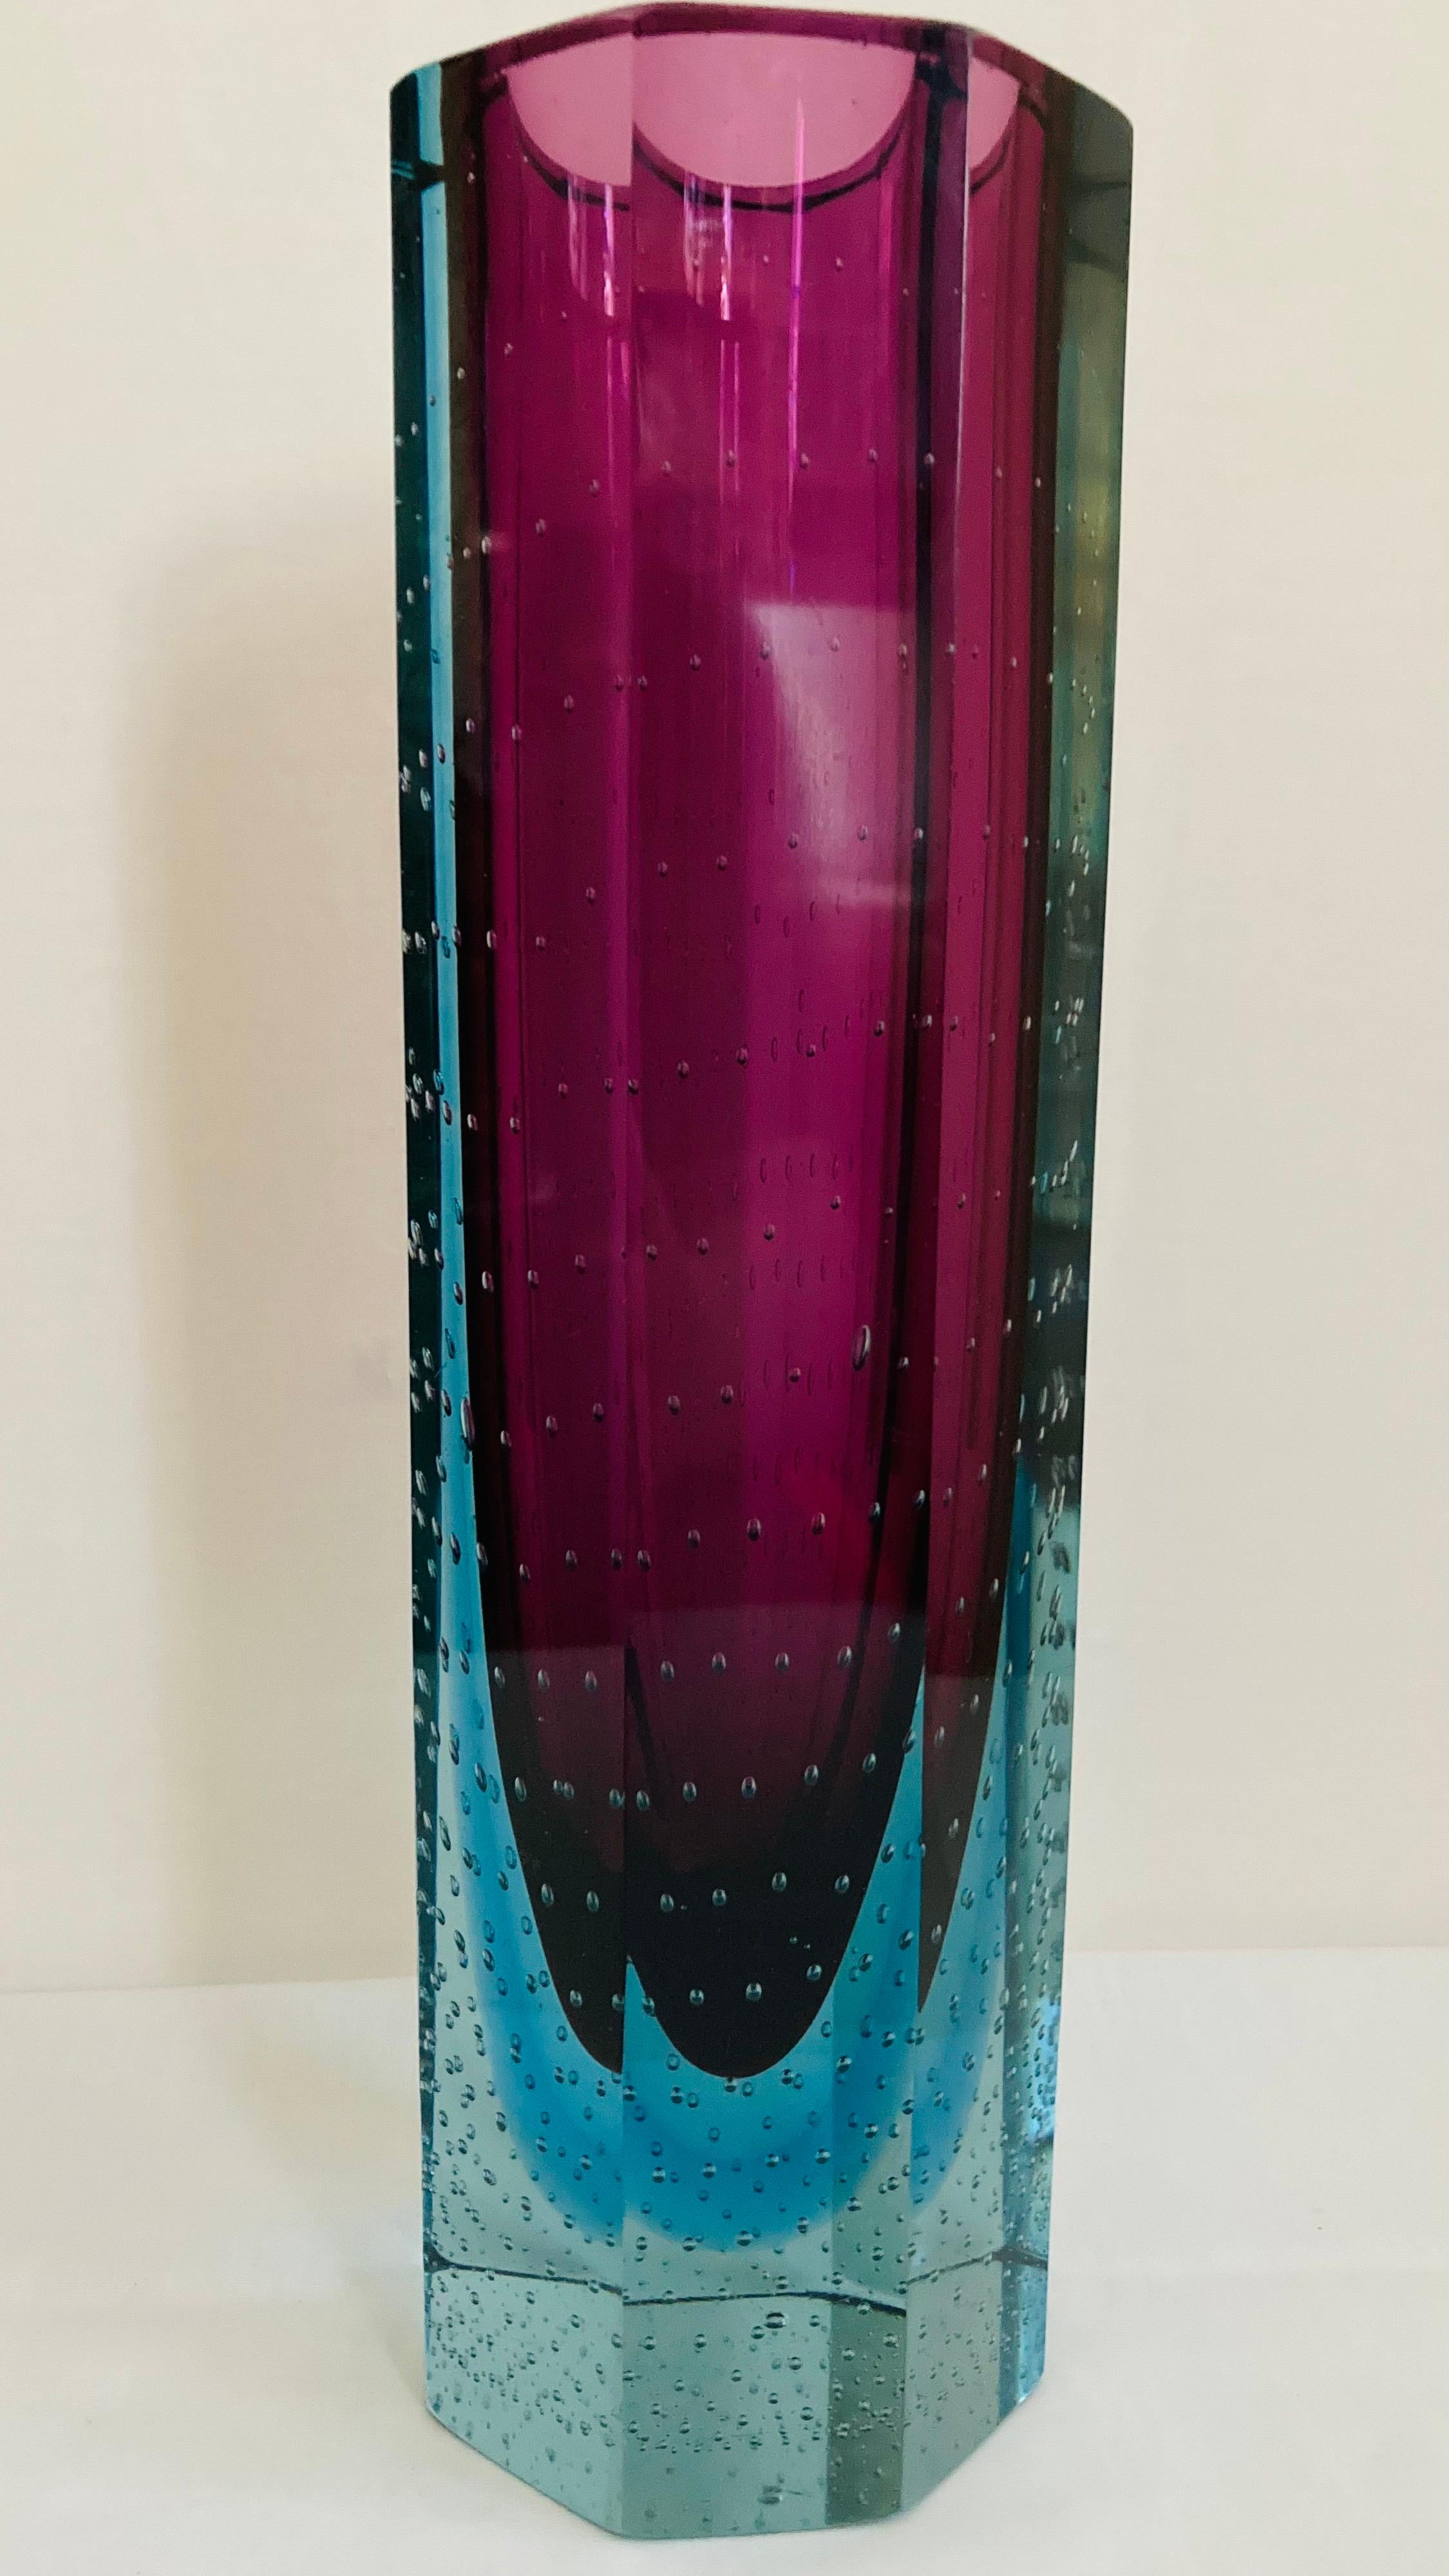 Beautiful rare large mid. of century hexagonal faceted somerso vase, purple, blue and clear with controlled bubbles by Flavio Poli for Seguso  brilliant condition  Very rare this dimensions. (3.7kg) and original sticker. 